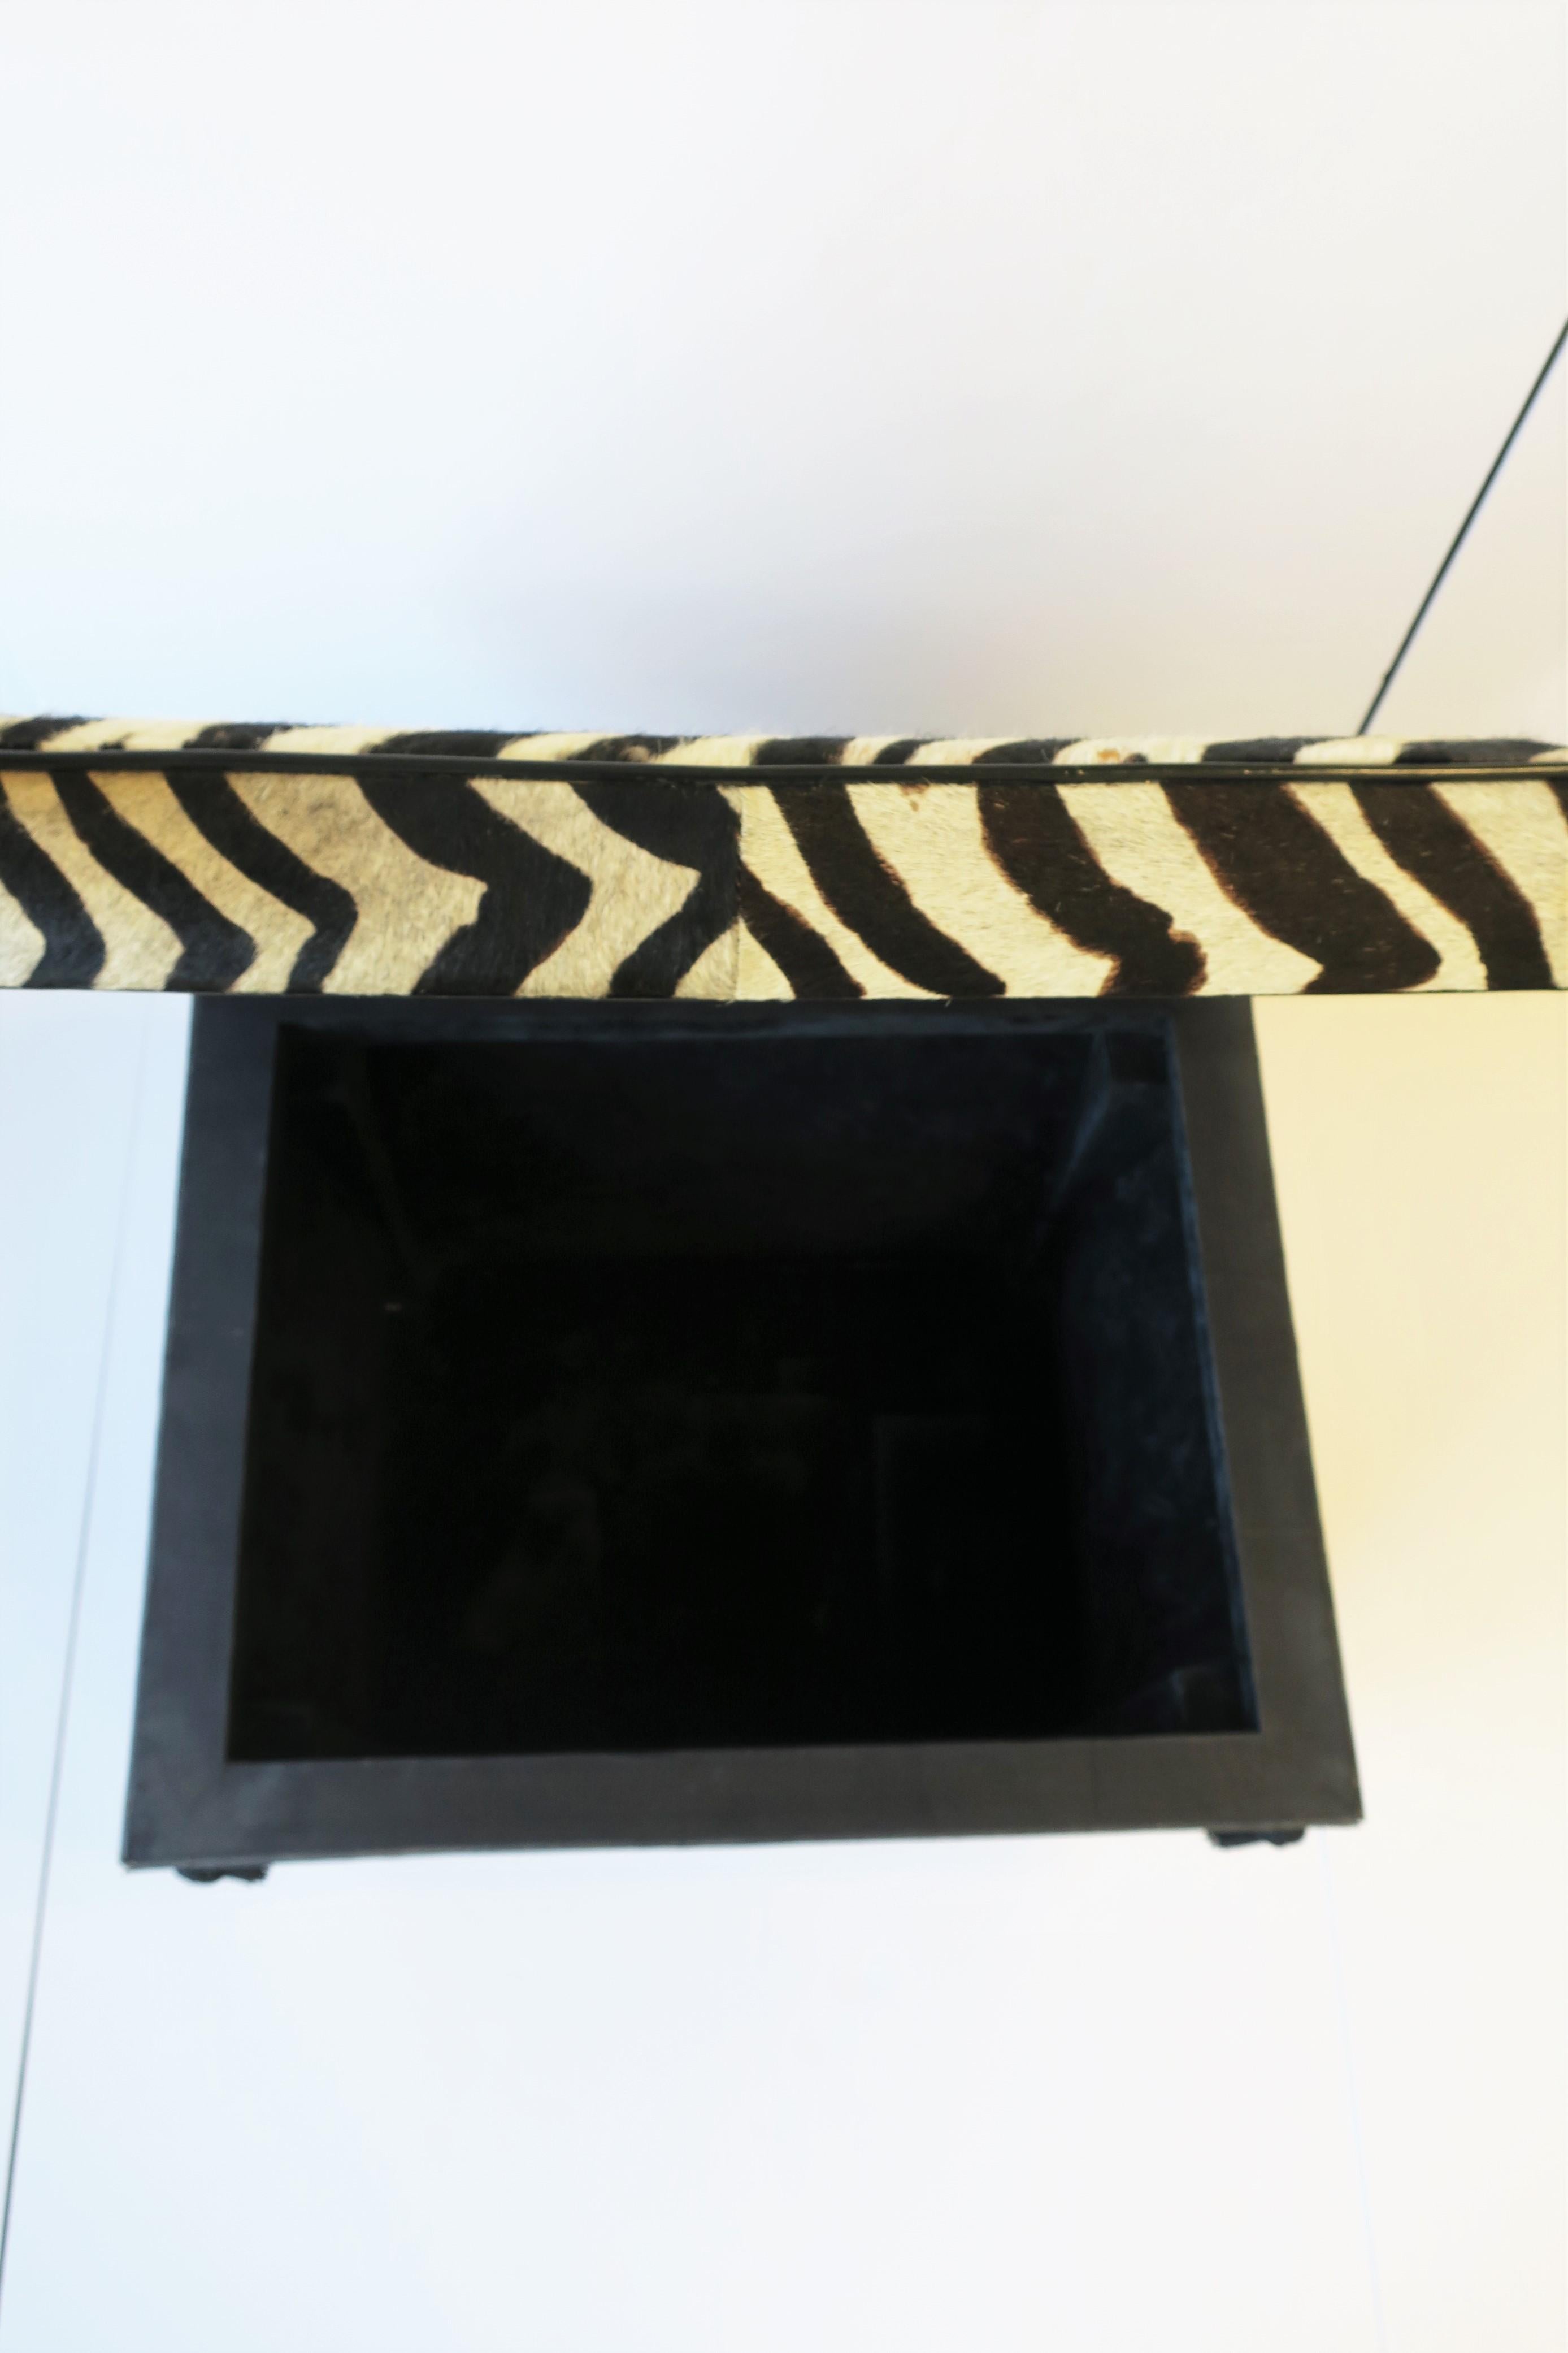 Zebra Hide Bench Stool with Storage Trunk and Tassels, circa 1980s 1990s For Sale 6